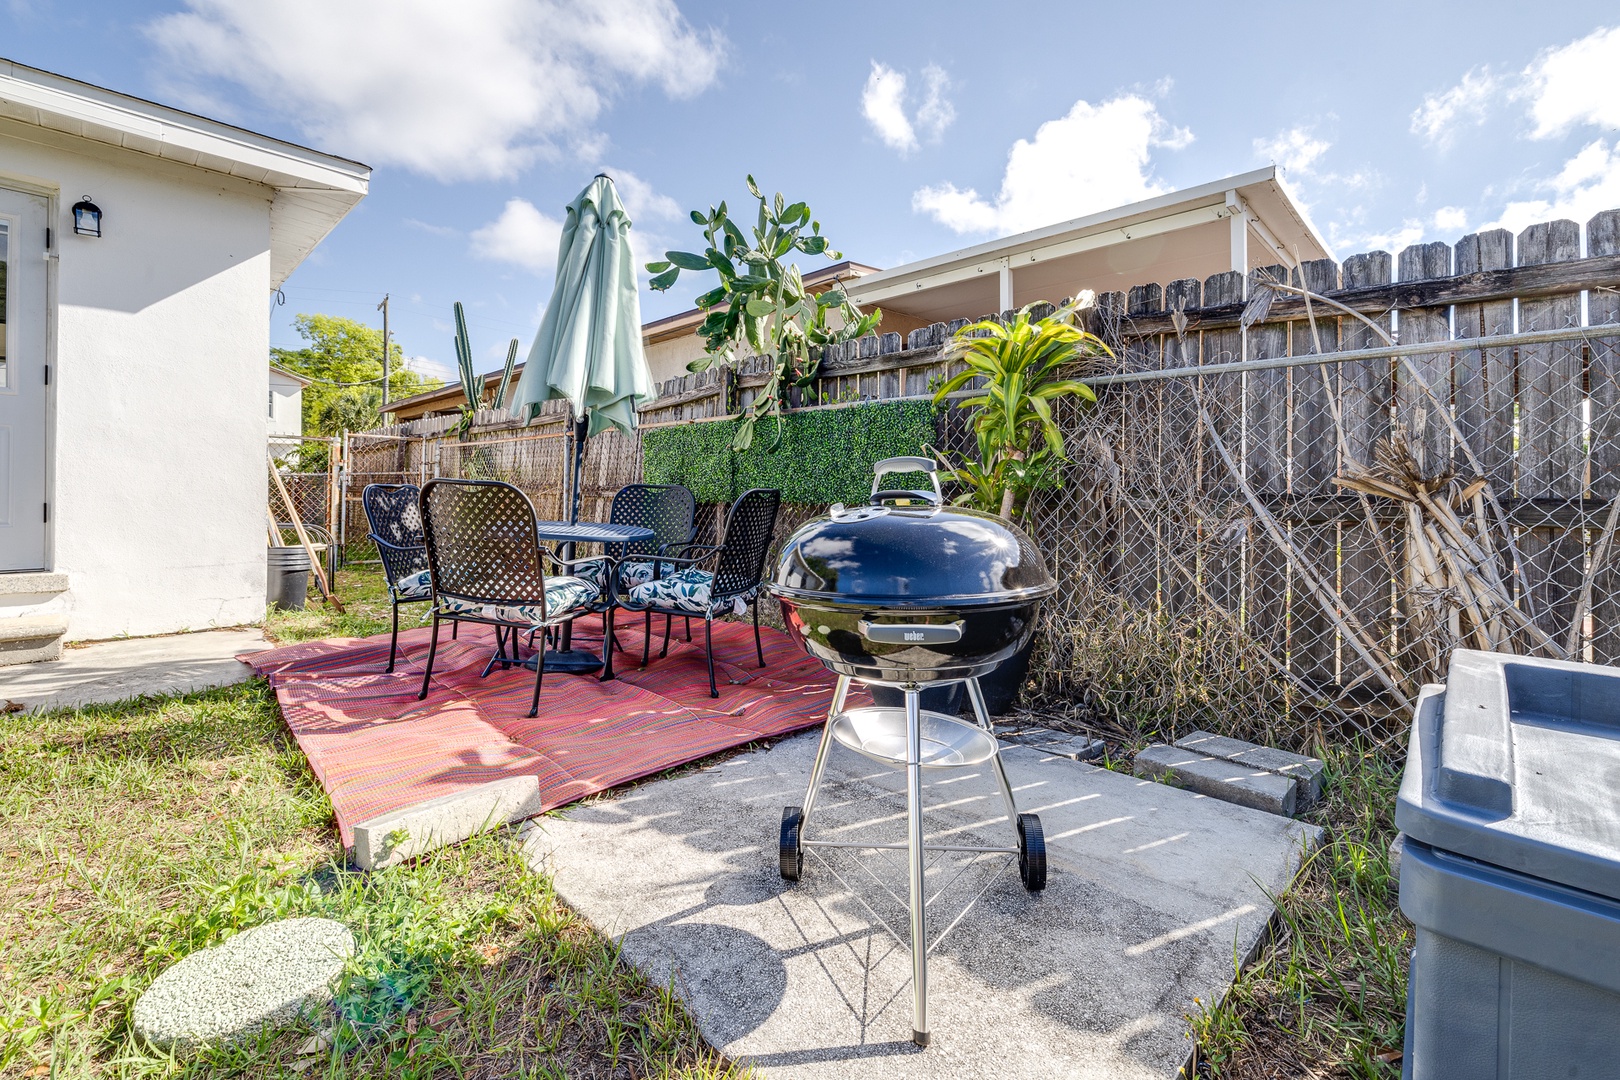 Spacious back yard with outdoor seating and grill